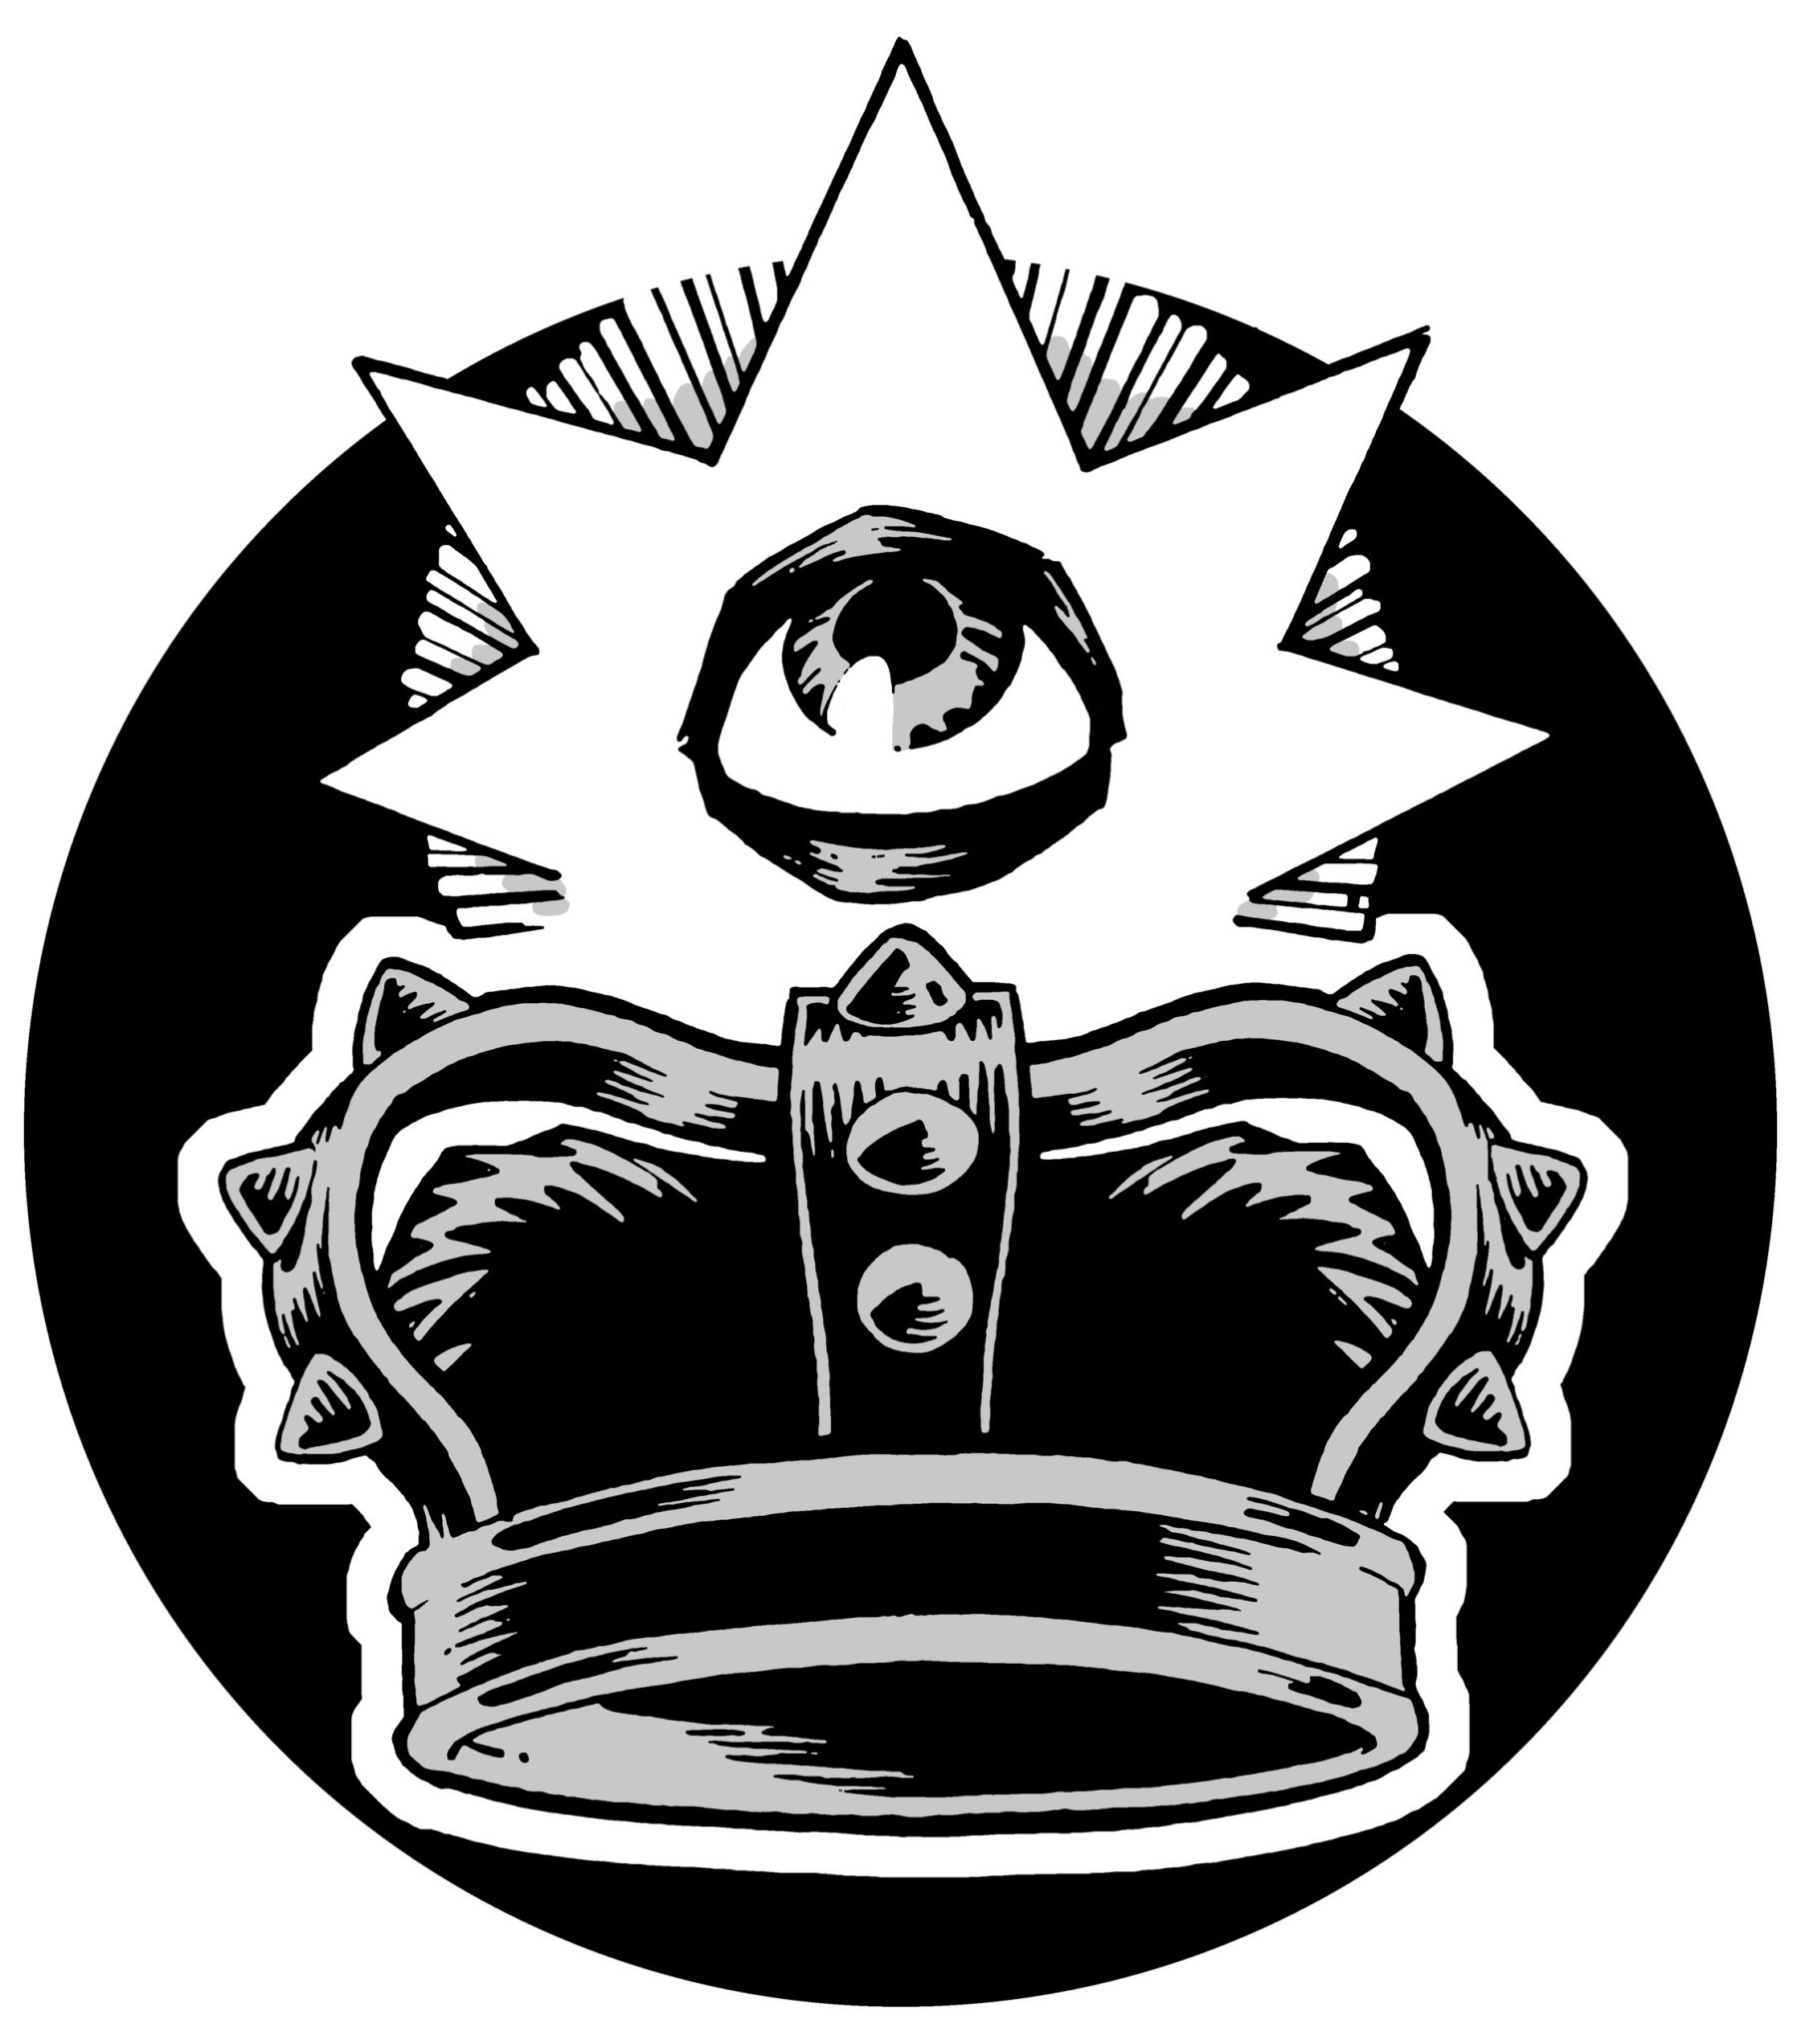 IDW Publishing to launch a new creator-owned imprint titled Black Crown.